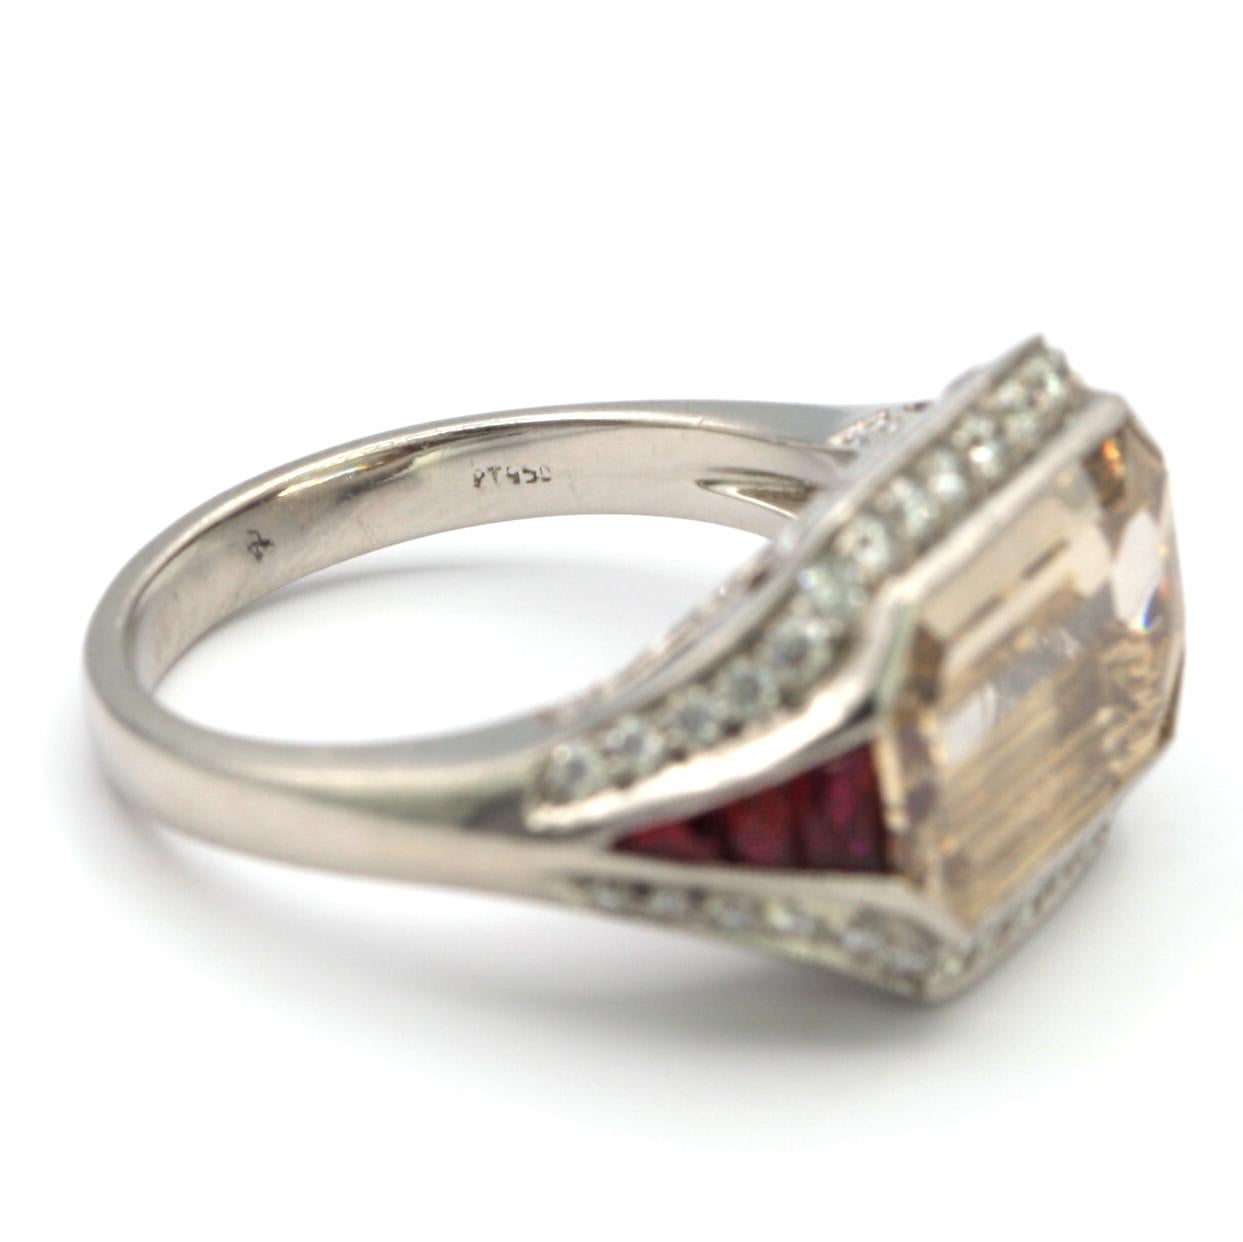 5.00 Carat Emerald Cut Diamond with Rubies in Platinum Ring For Sale 1